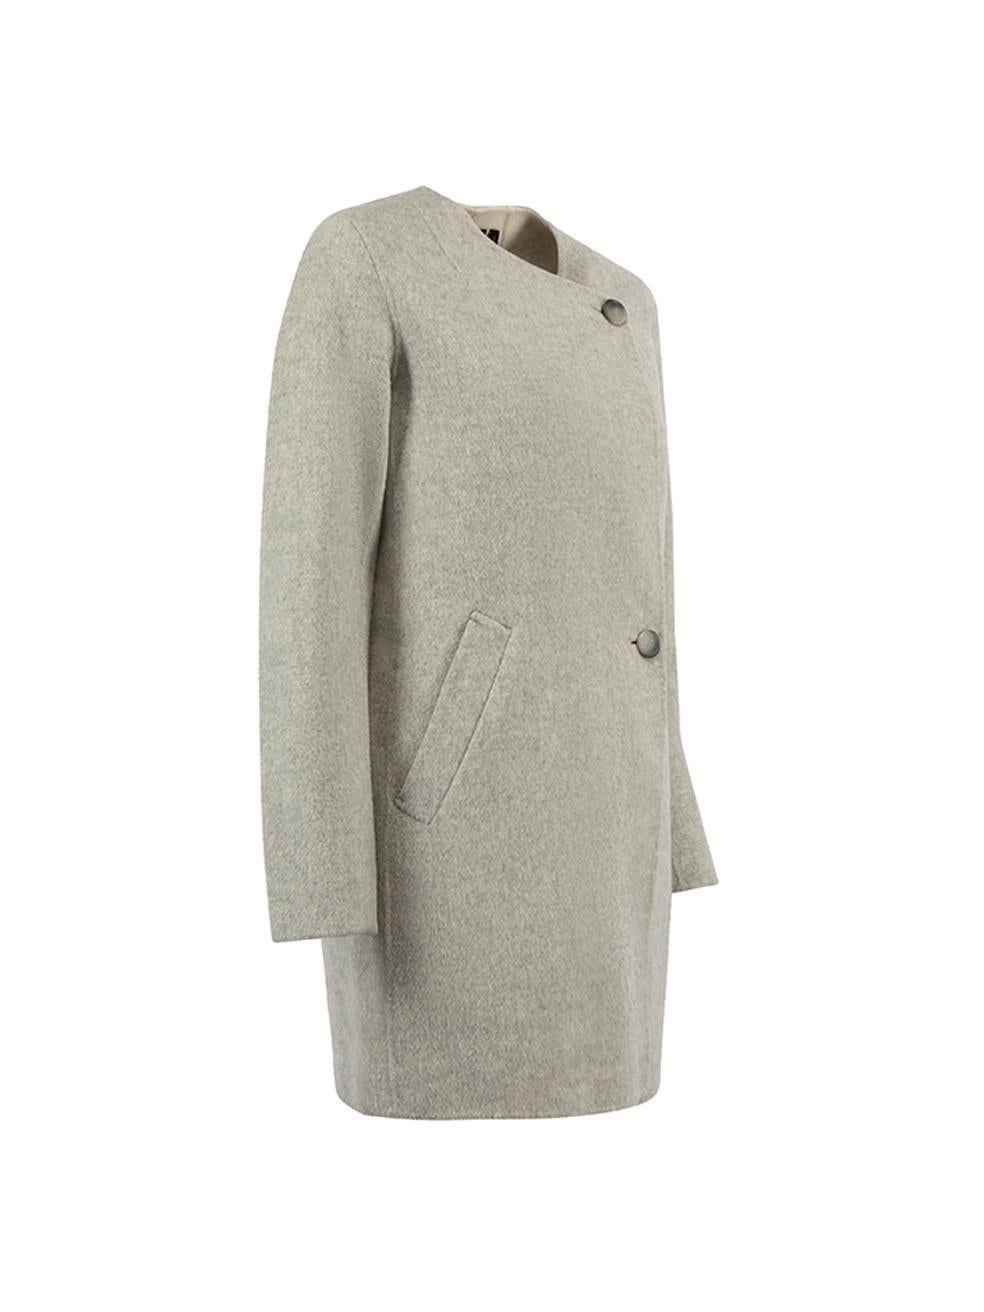 CONDITION is Very good. Hardly any visible wear to coat is evident on this used Theory designer resale item.   Details  Grey Wool Mid length coat Double breasted Buttoned cuffs Front side pockets   Made in China  Composition 90% Wool and 10%